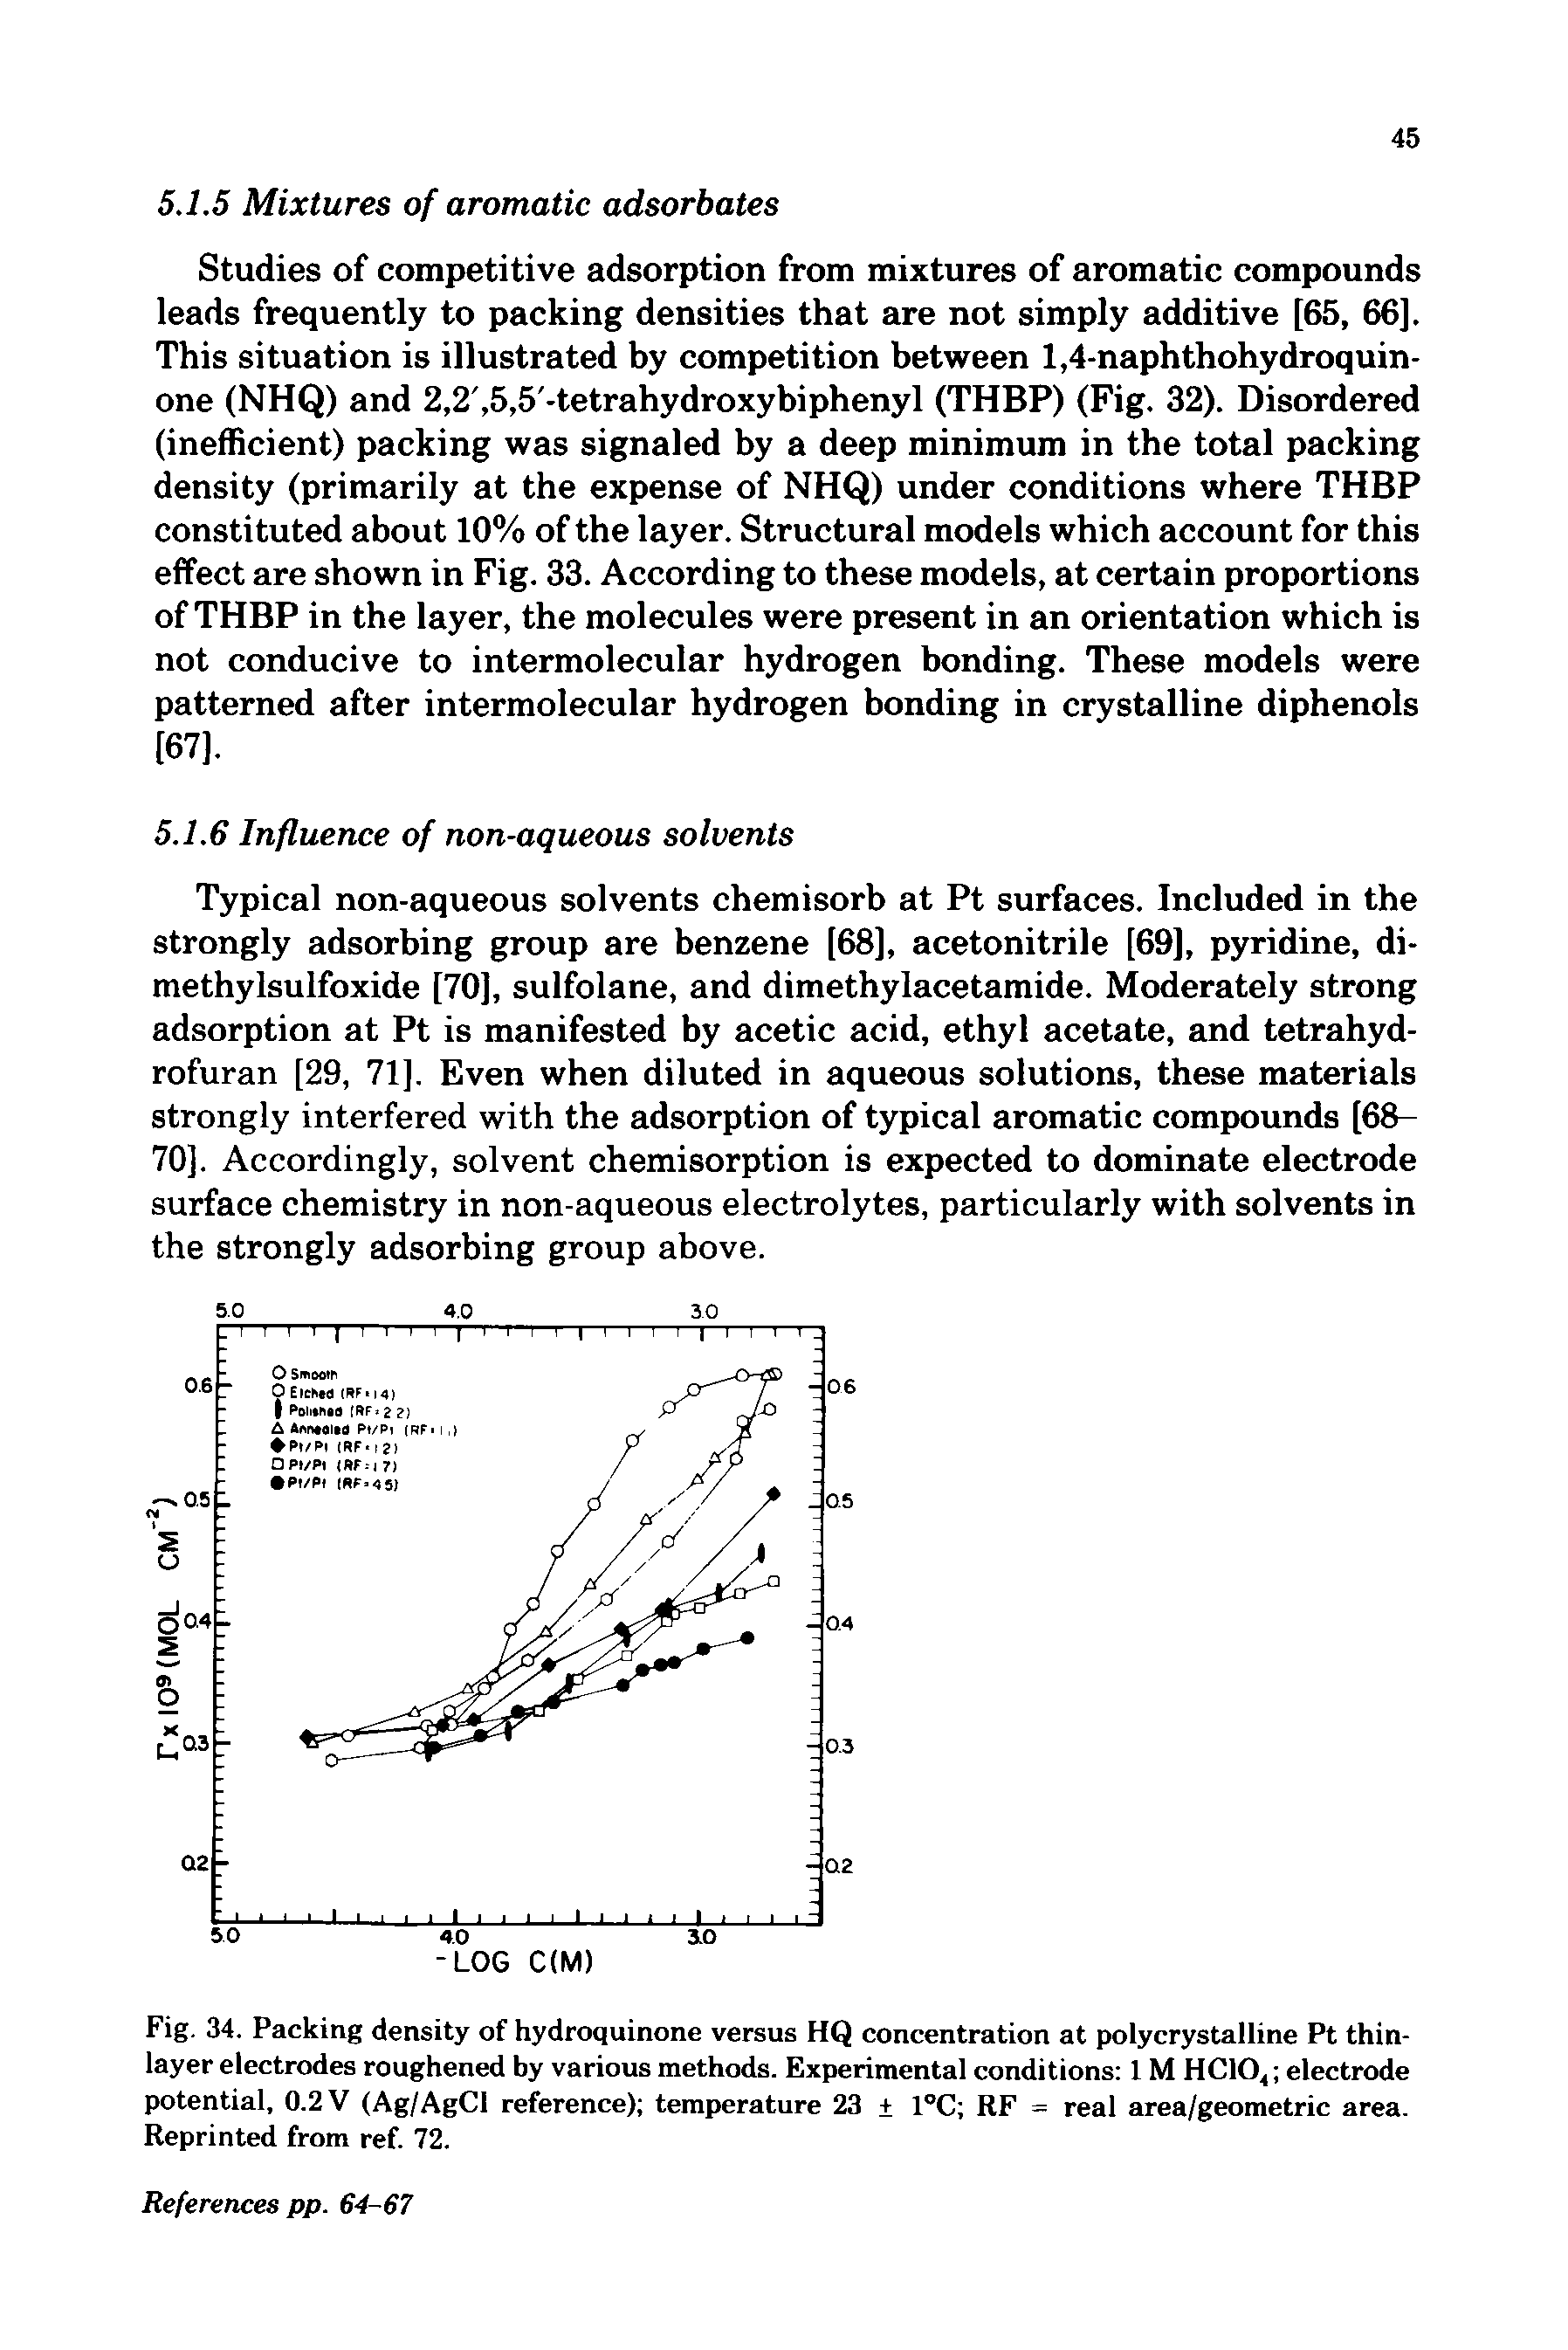 Fig. 34. Packing density of hydroquinone versus HQ concentration at polycrystalline Pt thin-layer electrodes roughened by various methods. Experimental conditions 1 M HCIO, electrode potential, 0.2 V (Ag/AgCl reference) temperature 23 1°C RF = real area/geometric area. Reprinted from ref. 72.